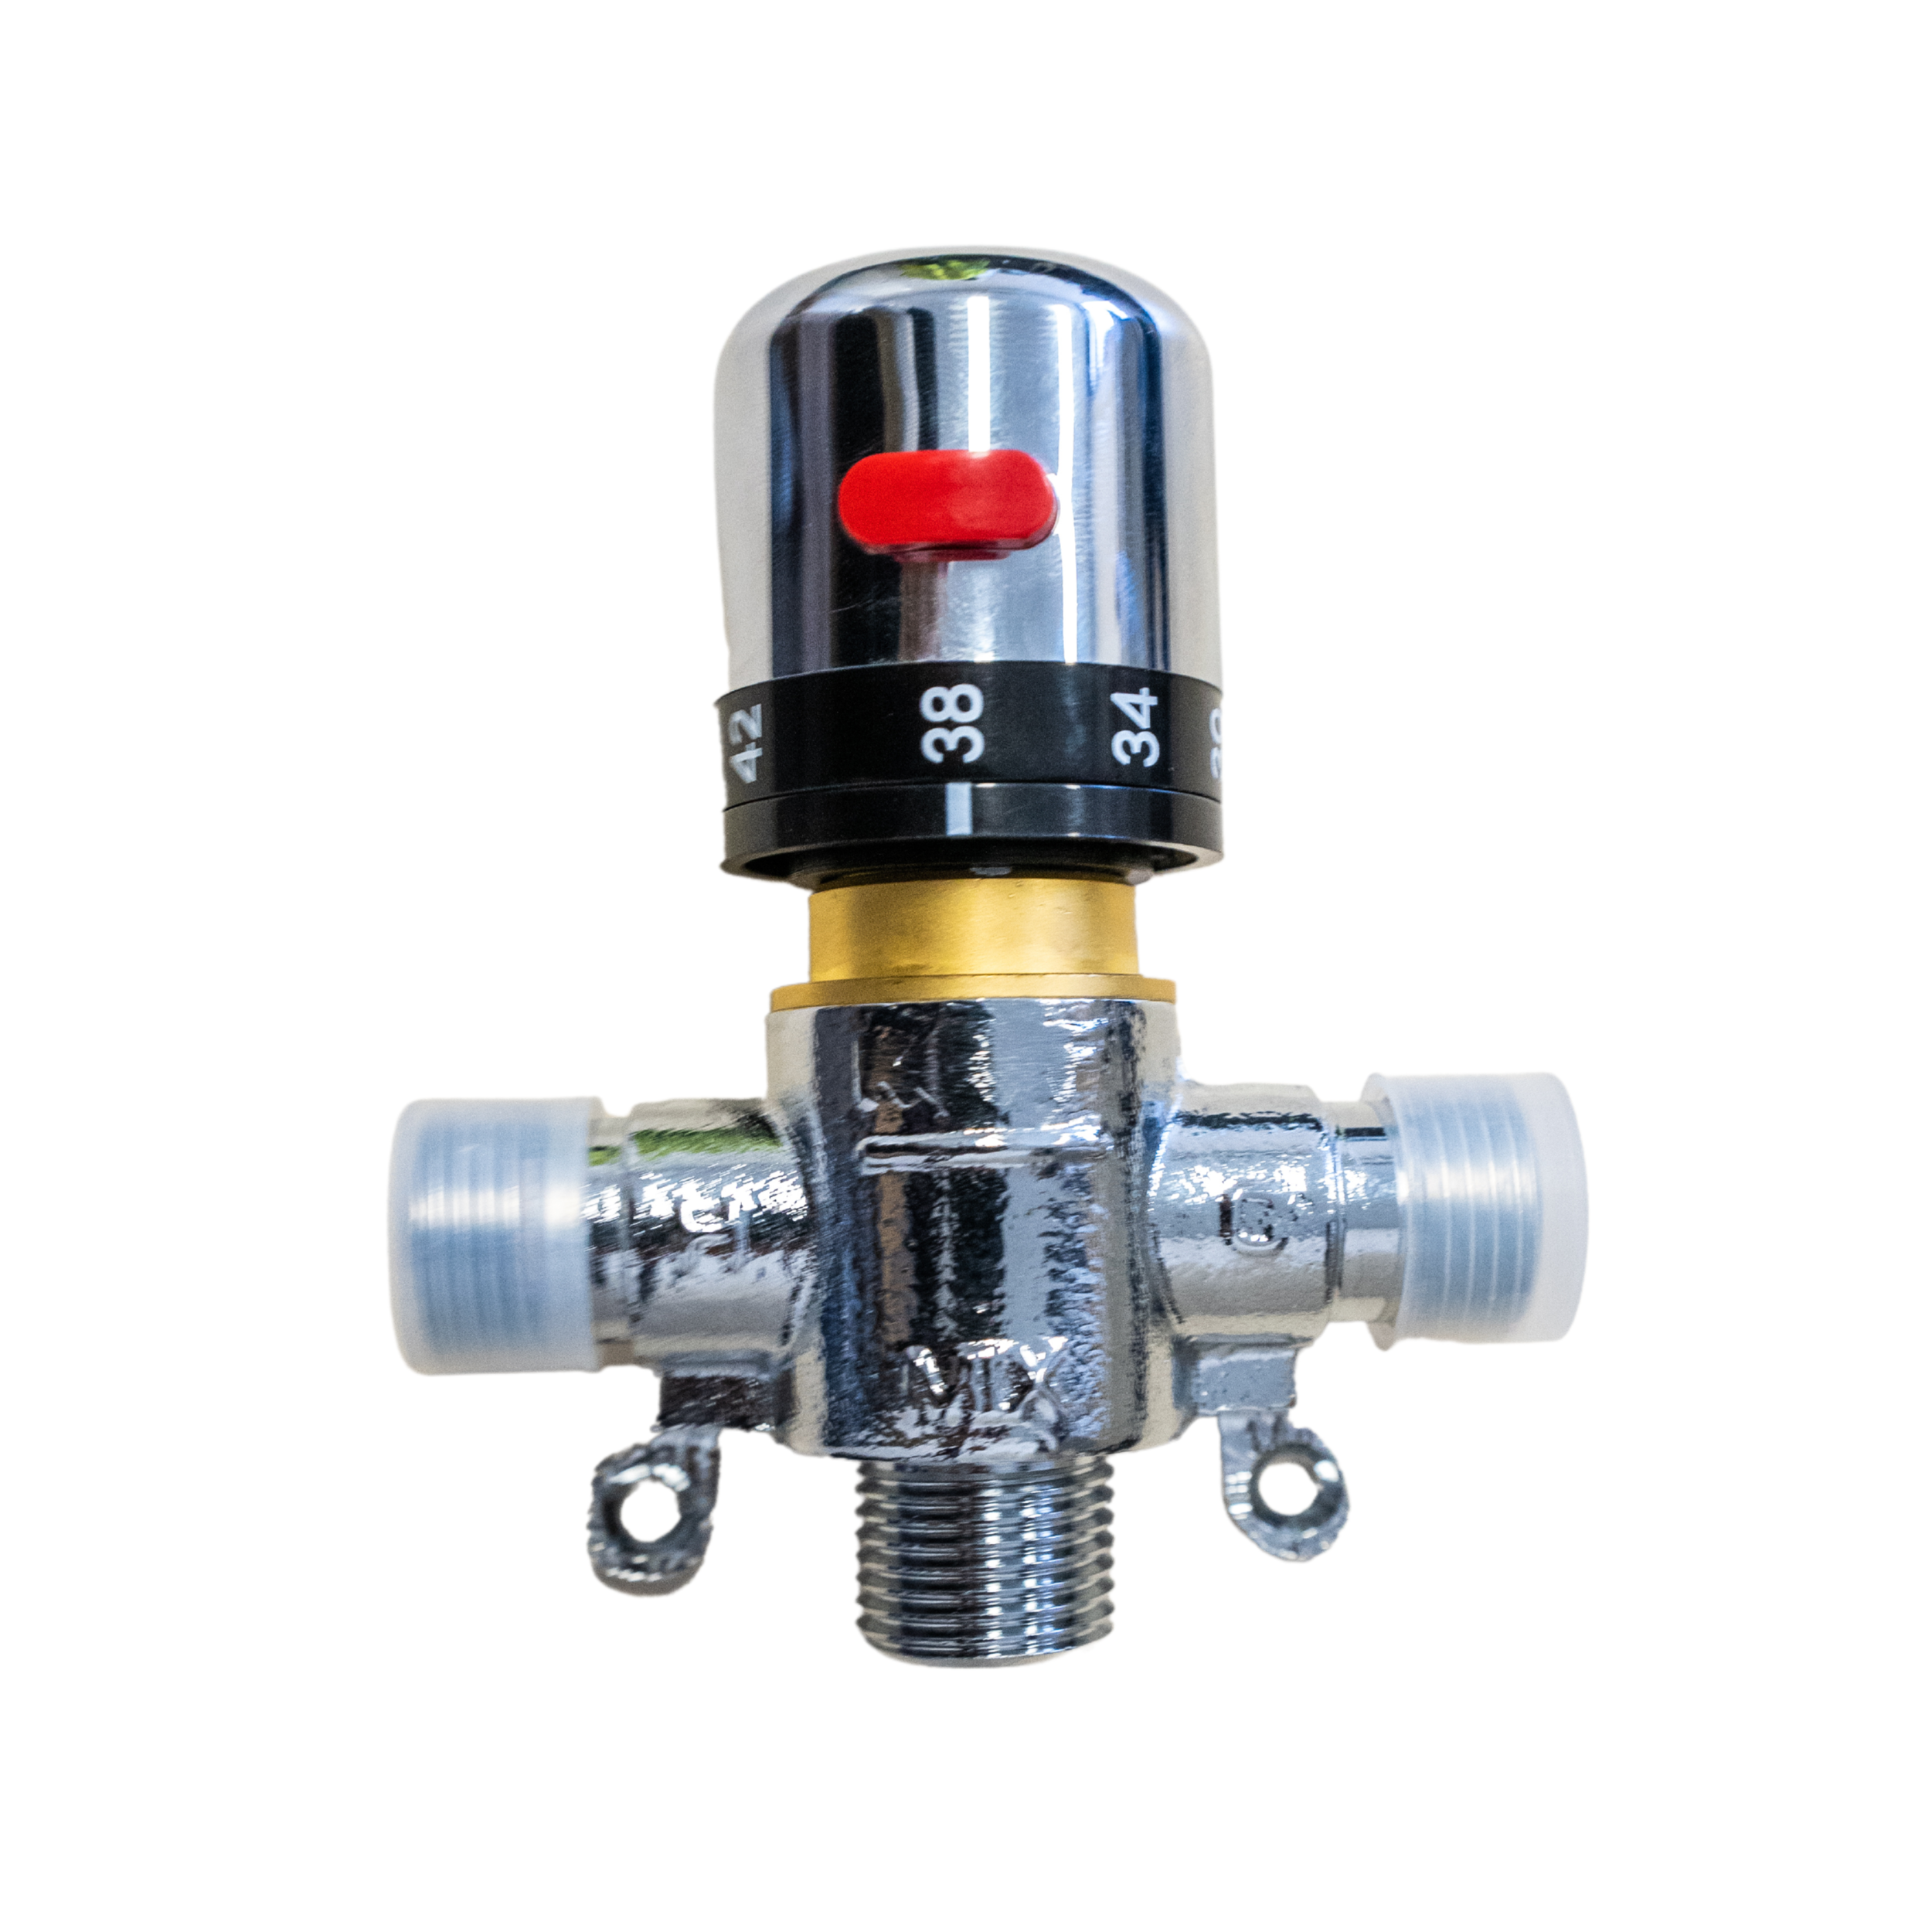 Temperature Mixing Valve Brass Hot Cold Thermostatic Valve, thread size 1/2 BSP female